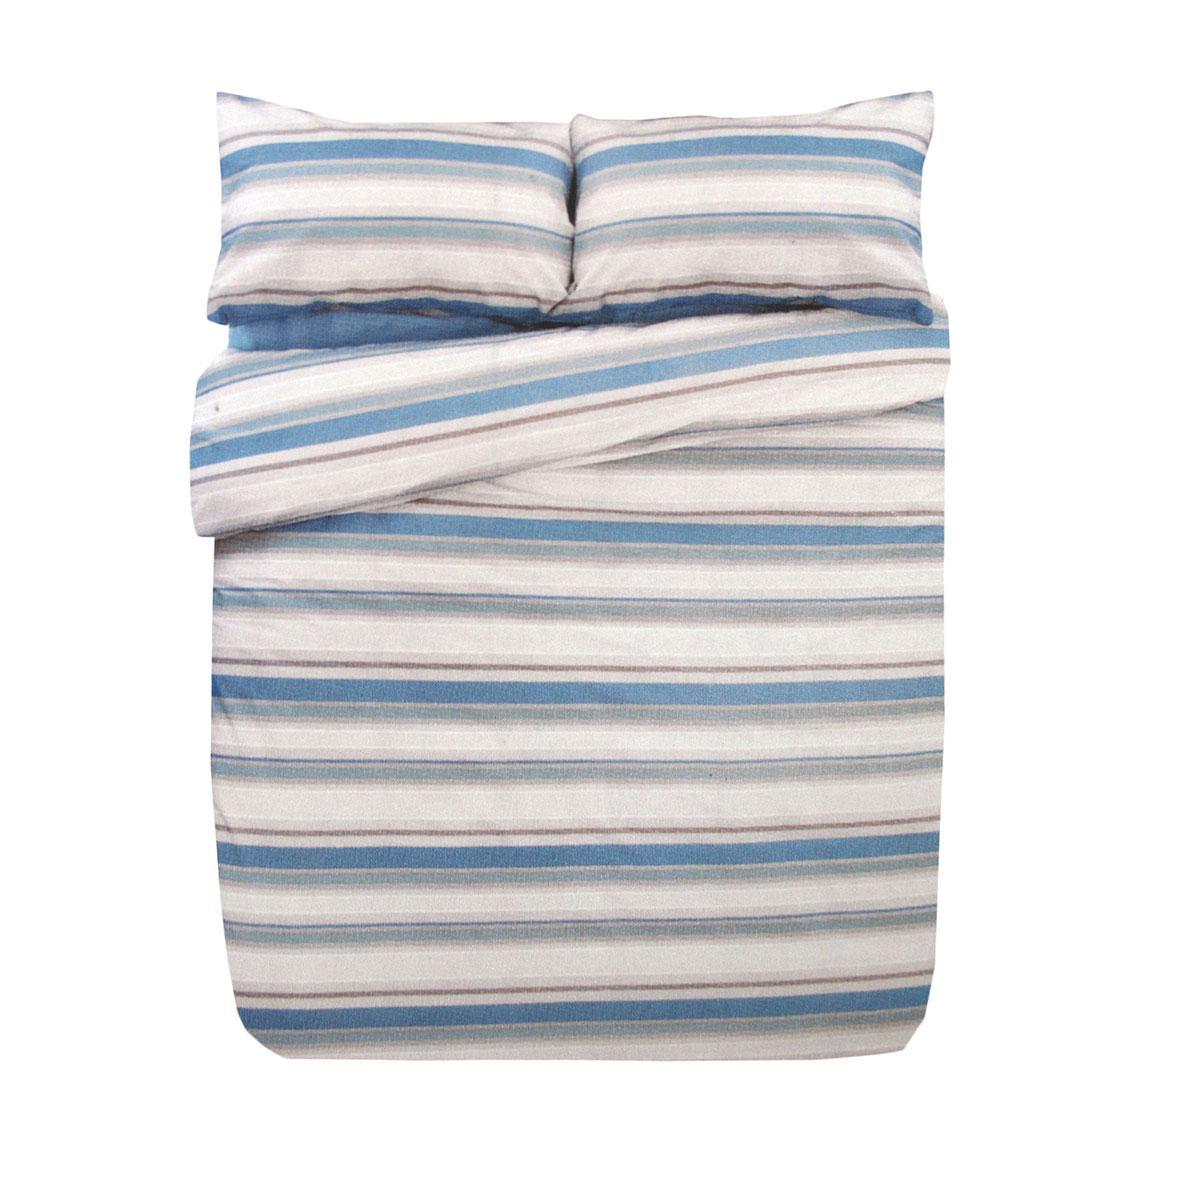 Apartmento Oxford Blue Striped Quilt Cover Set King